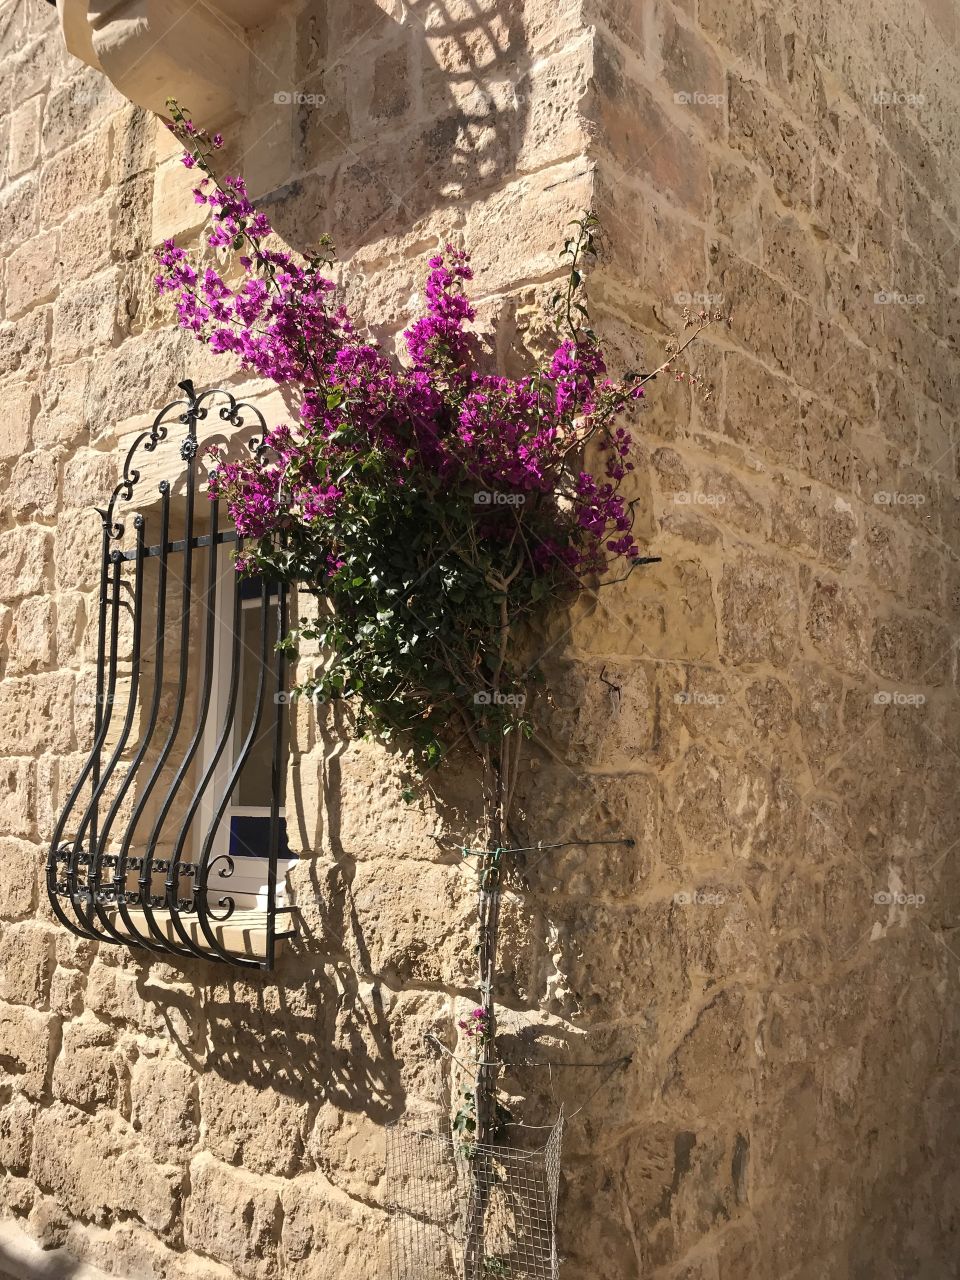 A beautiful traditional Maltese antique house, decorated with one of my favourite plants, bougainvillea! -Made in Malta 